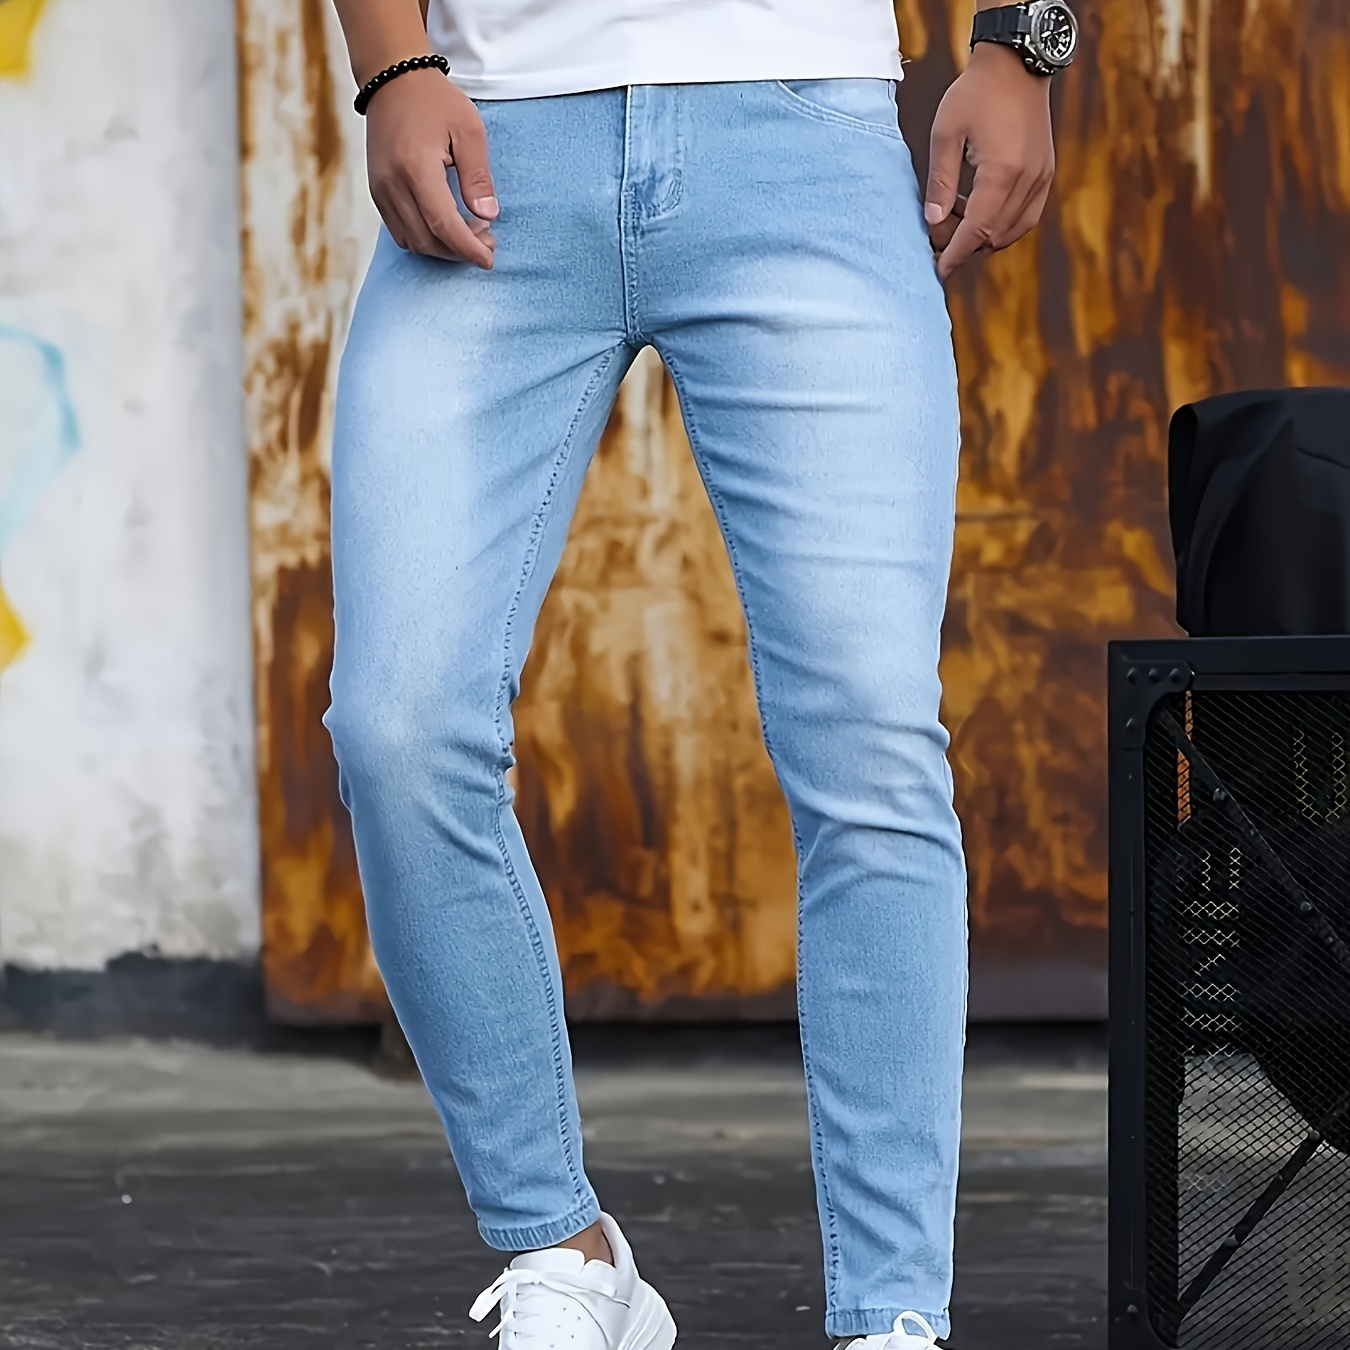 

Men's Casual Slim Fit Tapered Leg Jeans, Stylish Comfortable Cotton Blend Pants For Spring And Fall Daily Wear